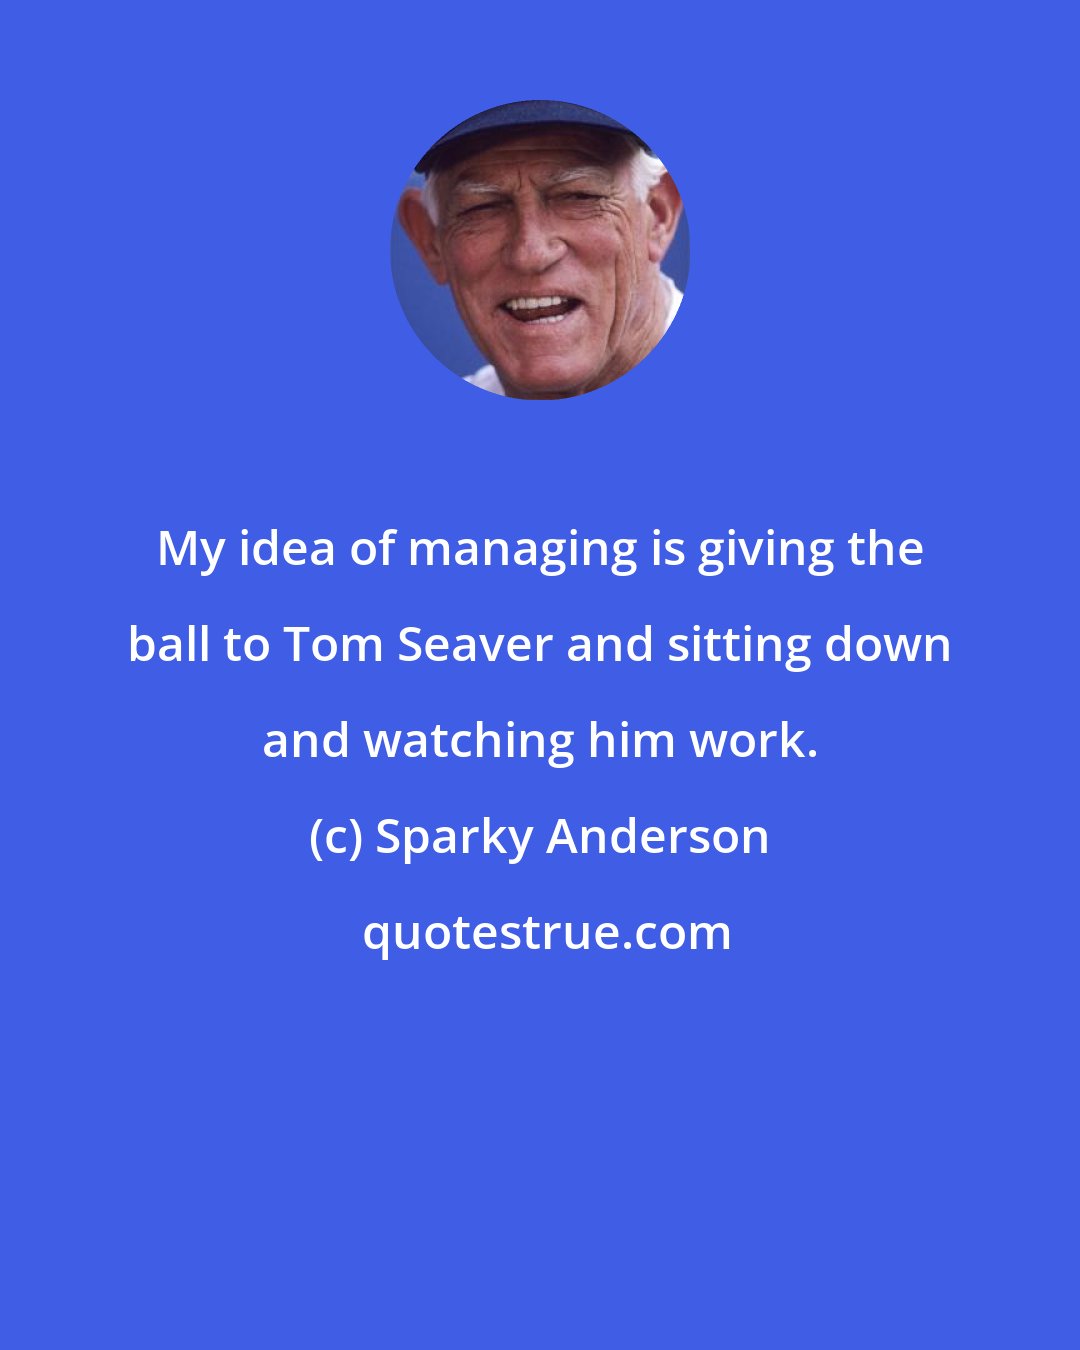 Sparky Anderson: My idea of managing is giving the ball to Tom Seaver and sitting down and watching him work.